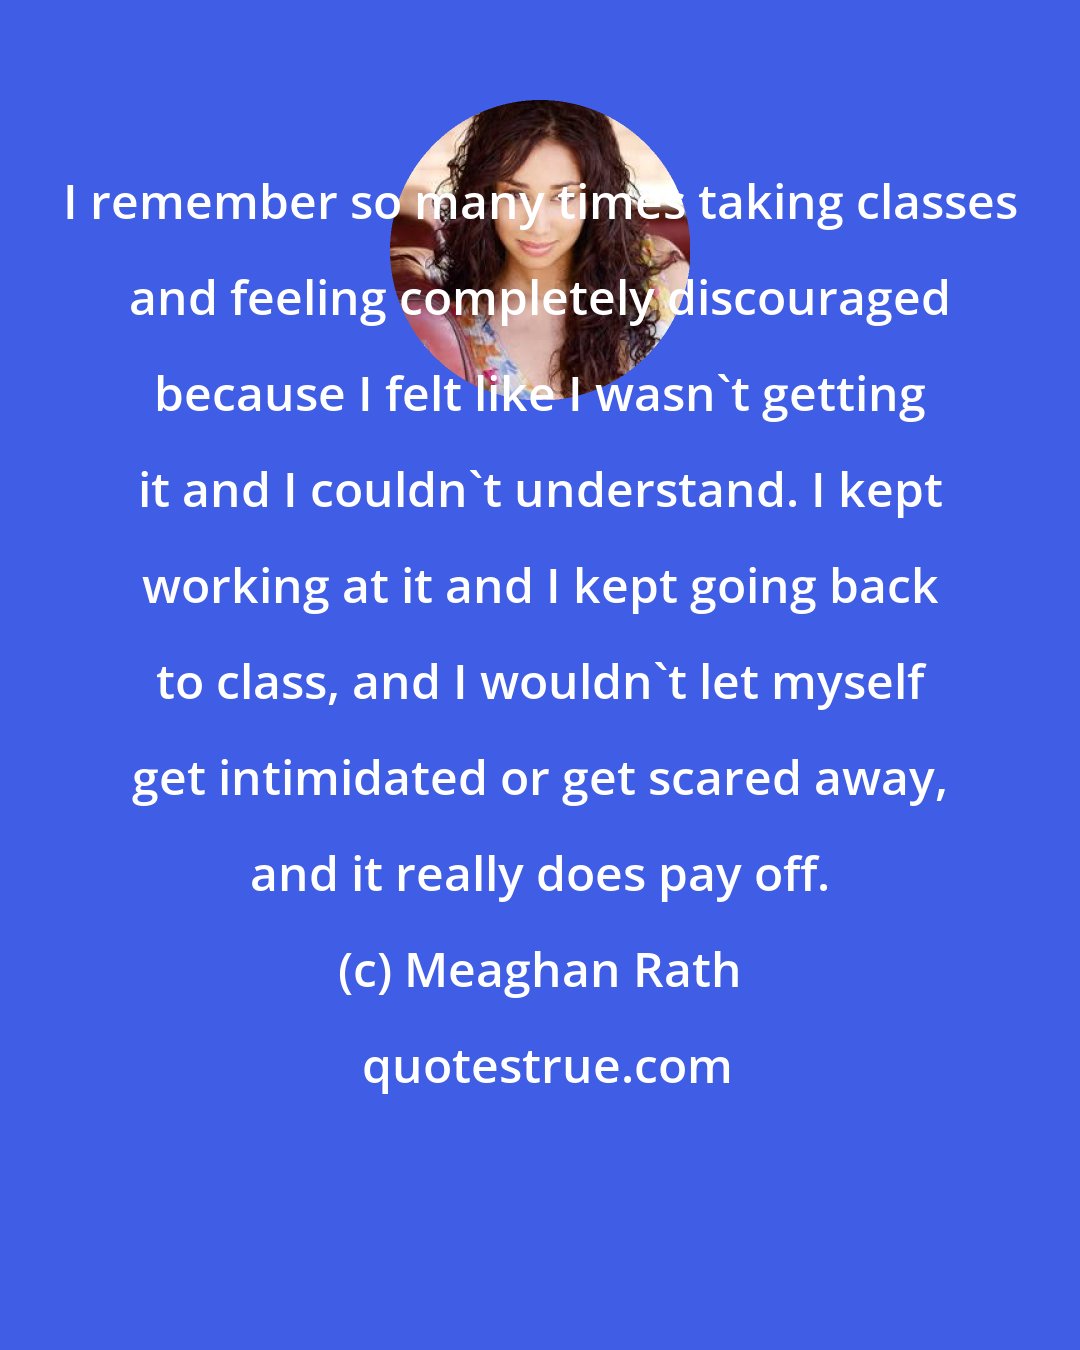 Meaghan Rath: I remember so many times taking classes and feeling completely discouraged because I felt like I wasn't getting it and I couldn't understand. I kept working at it and I kept going back to class, and I wouldn't let myself get intimidated or get scared away, and it really does pay off.